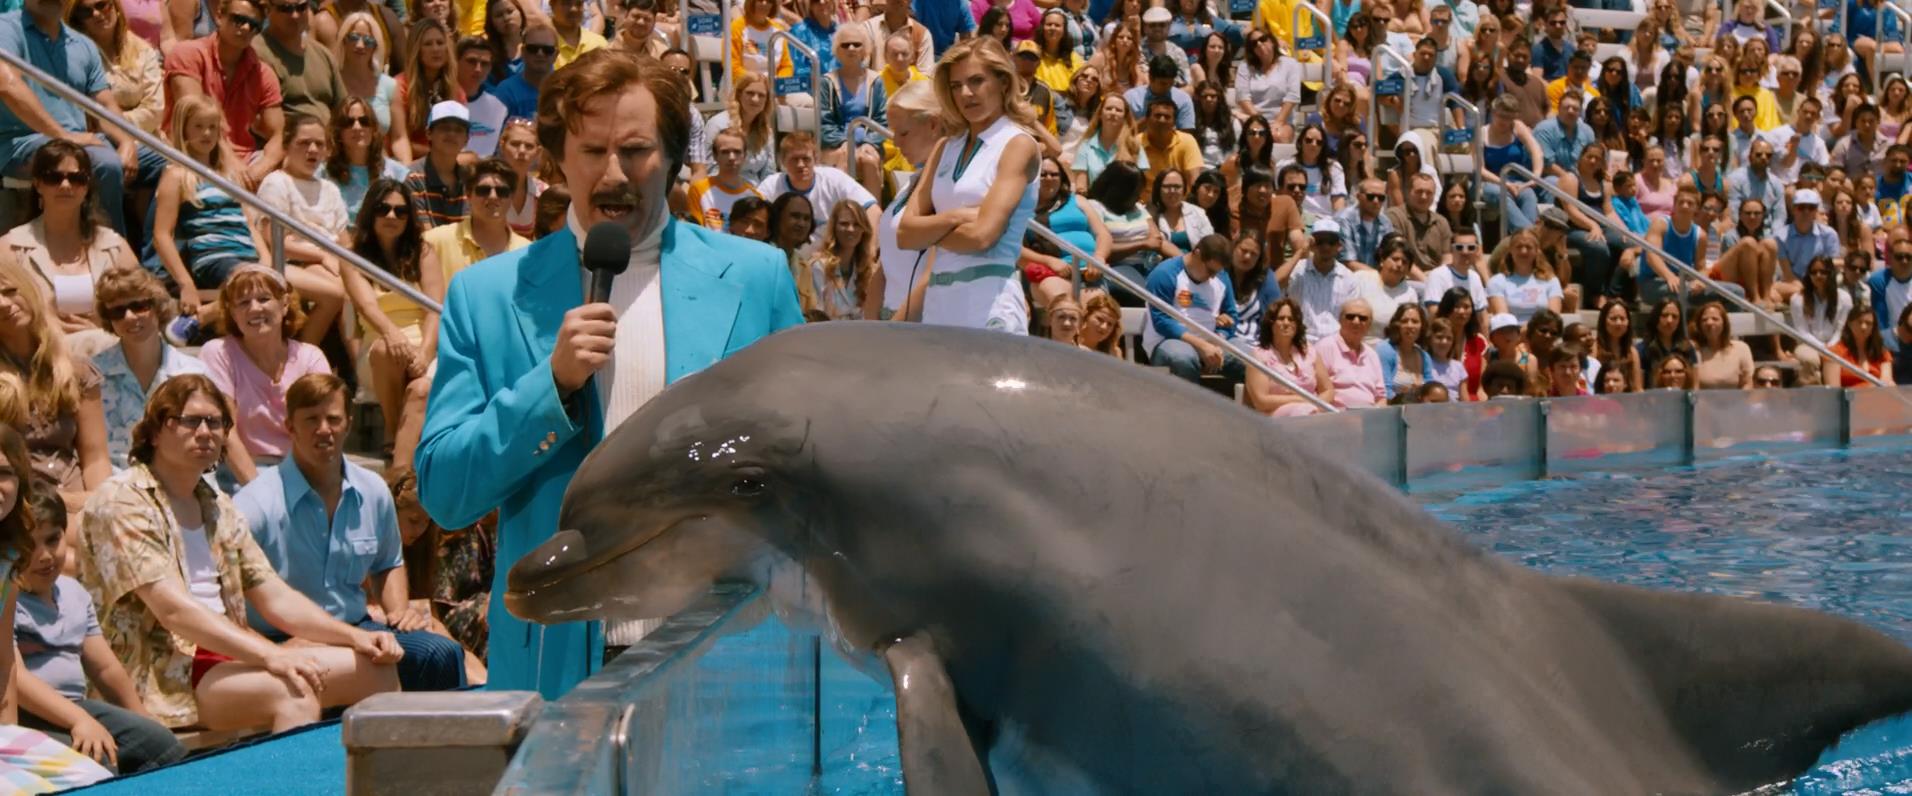 Anchorman 2 - Long hair with glasses. Bottom left corner of picture.